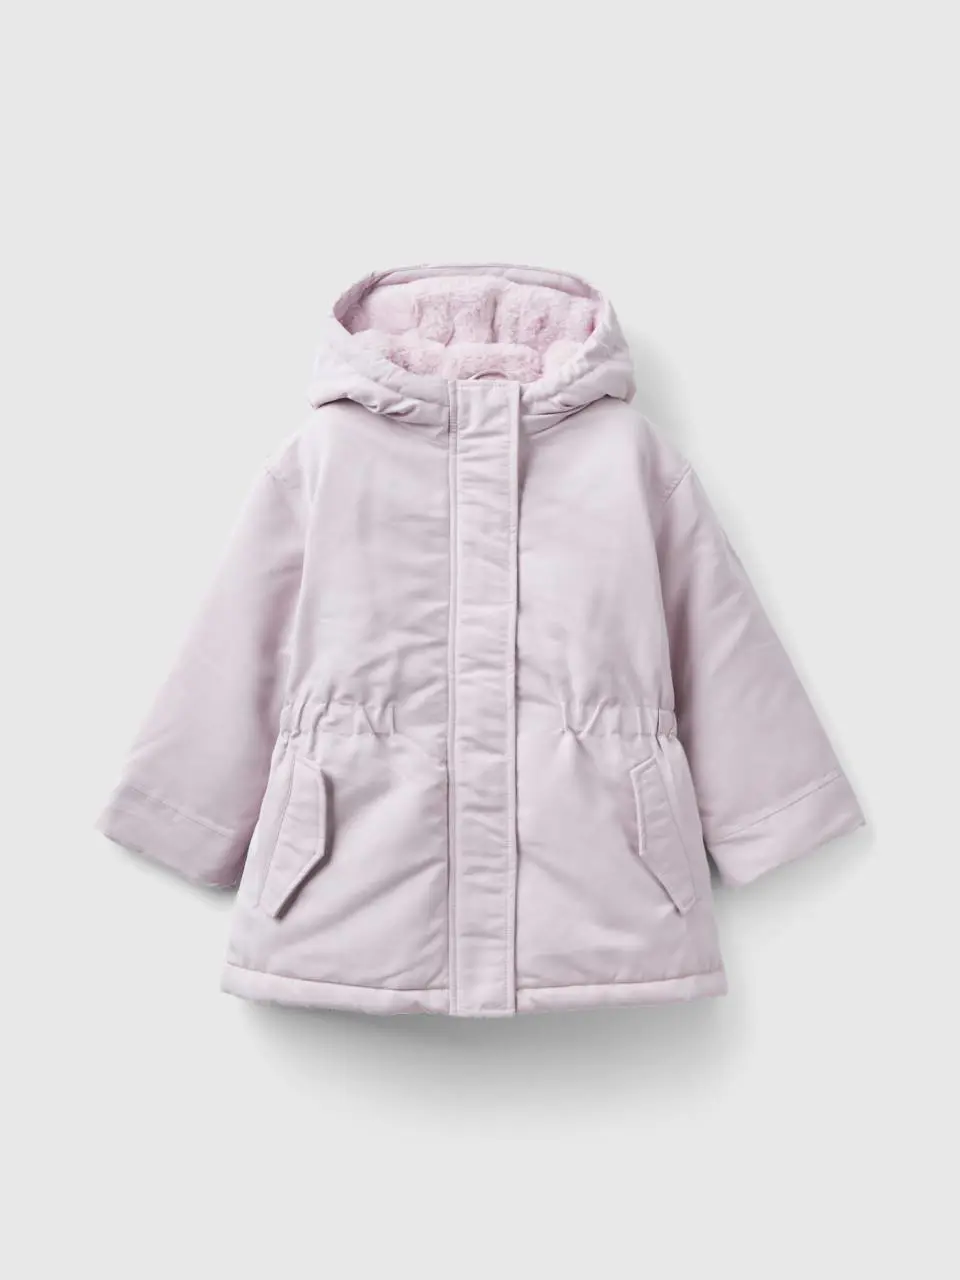 Benetton padded parka with drawstring. 1